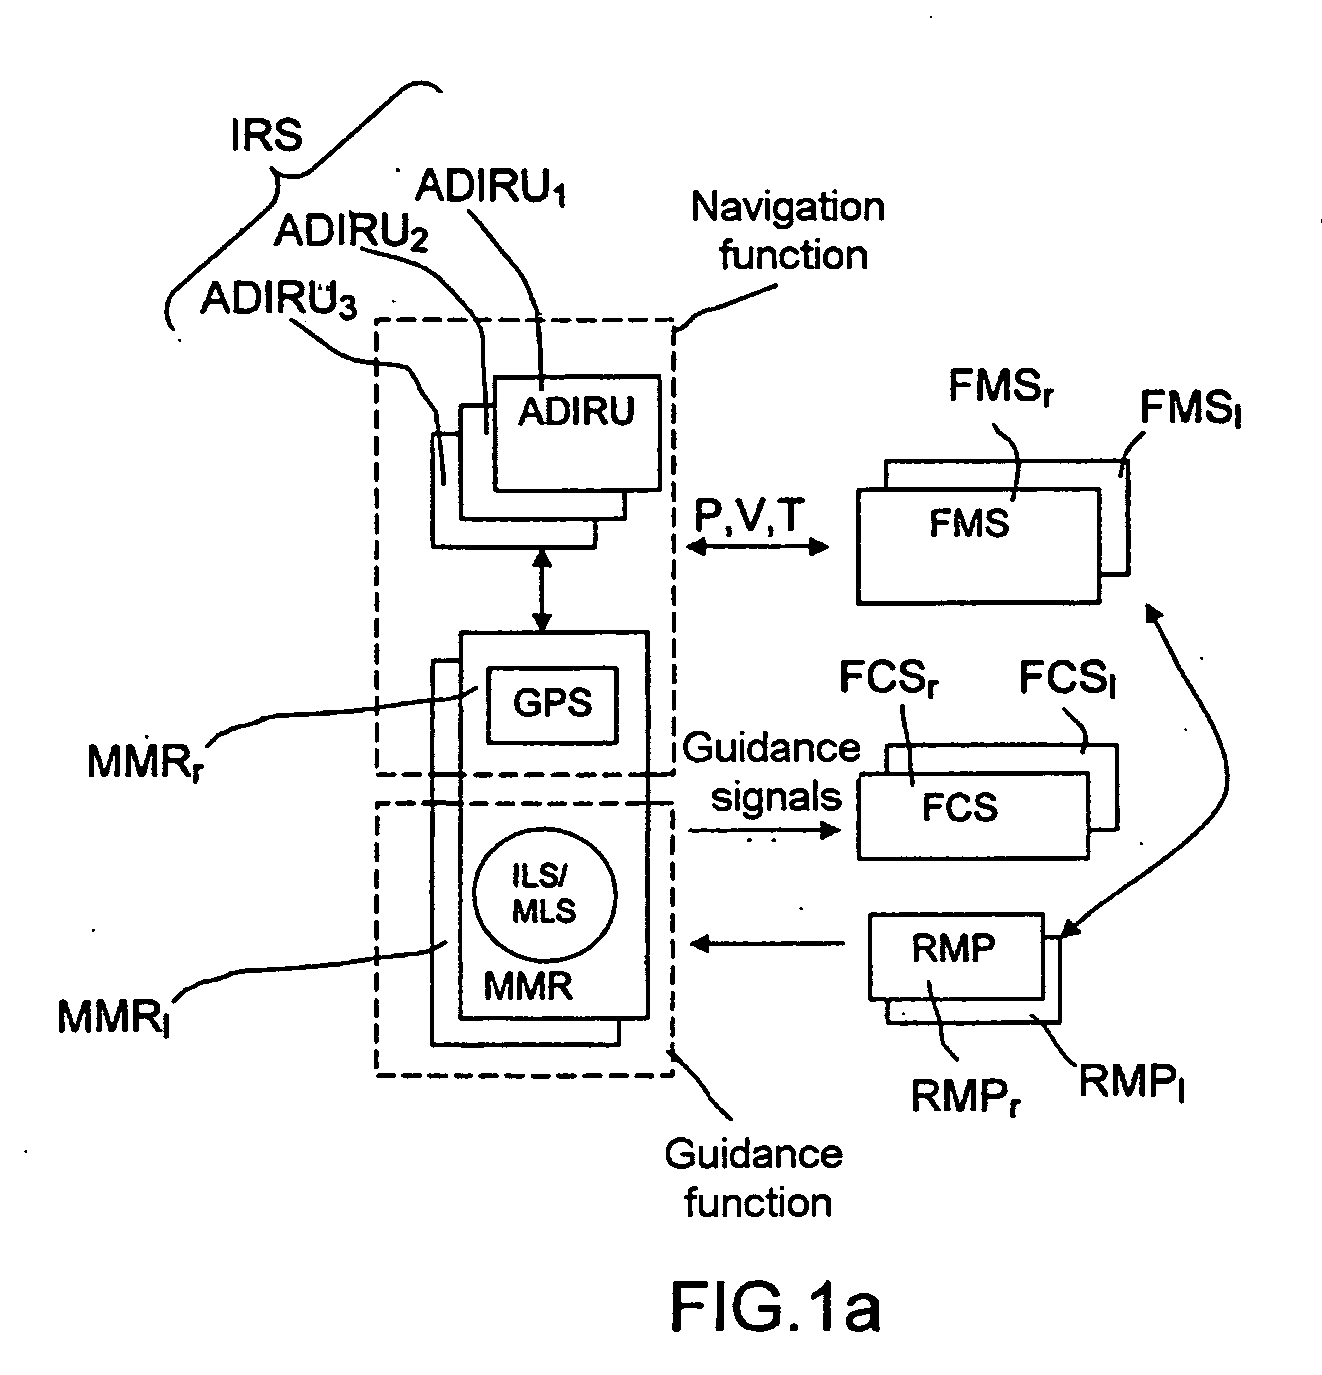 Architecture of an onboard aircraft piloting aid system